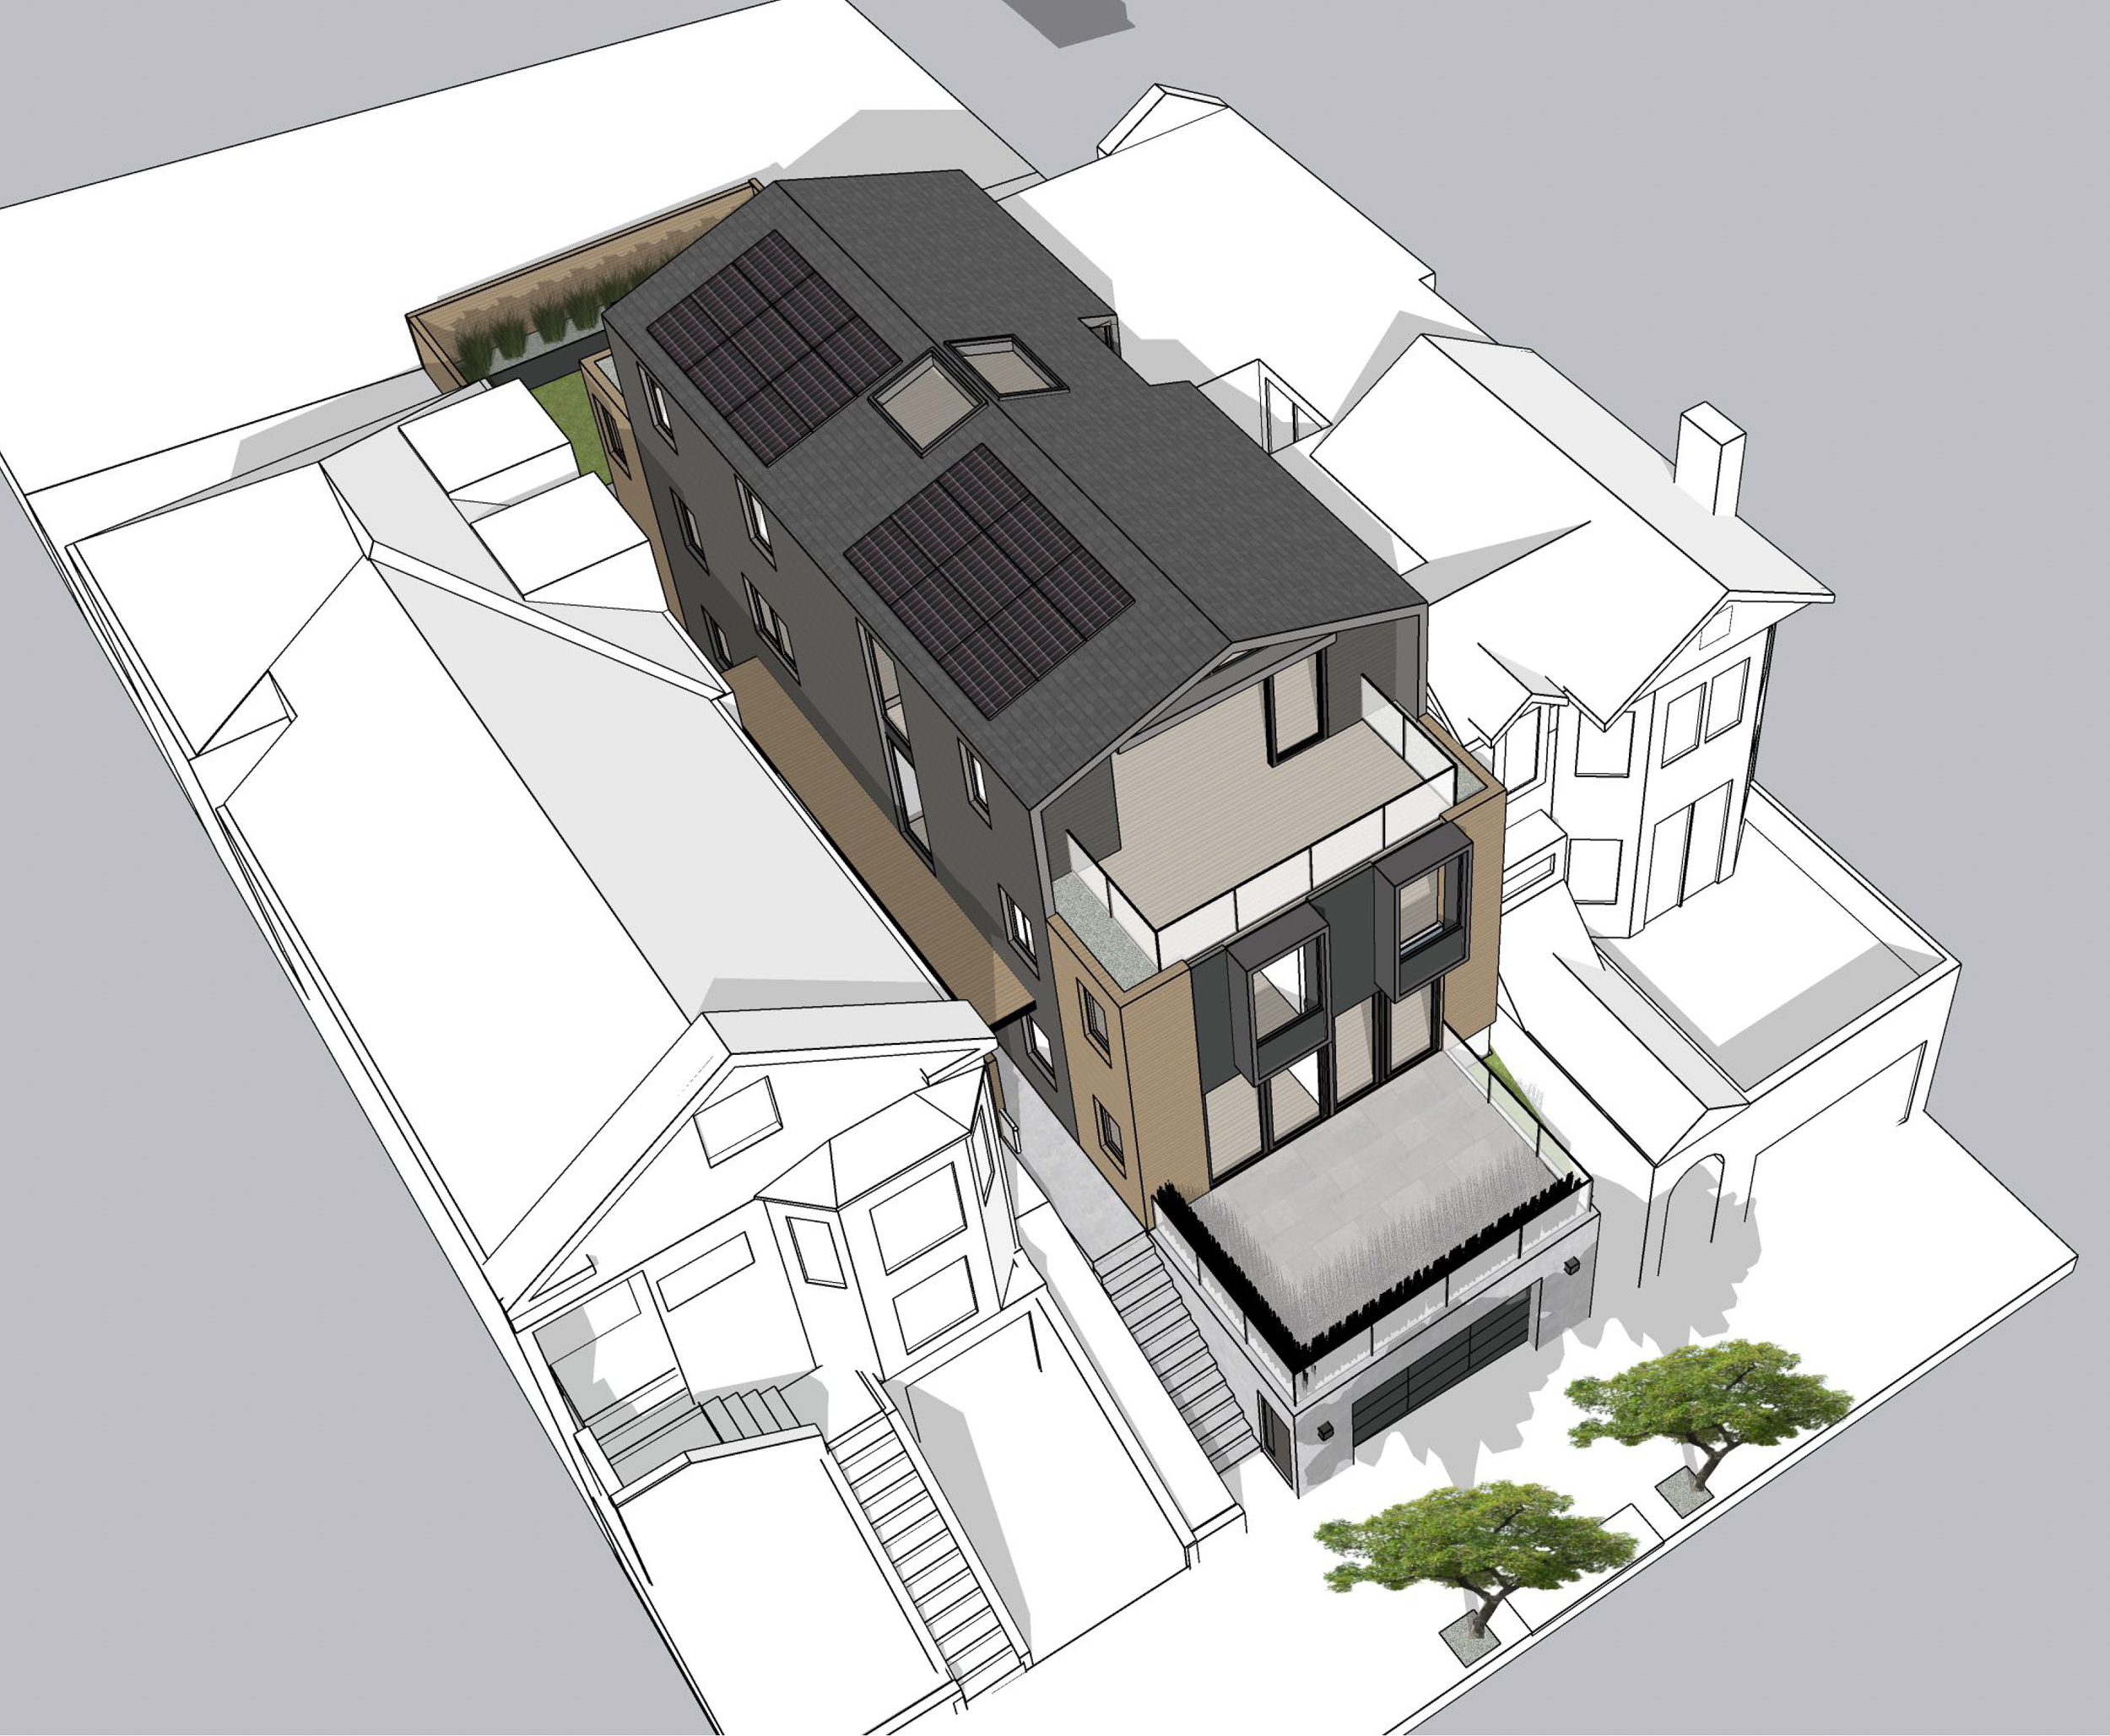 326 27th Street southwest aerial view, rendering by Knock Architecture and Design